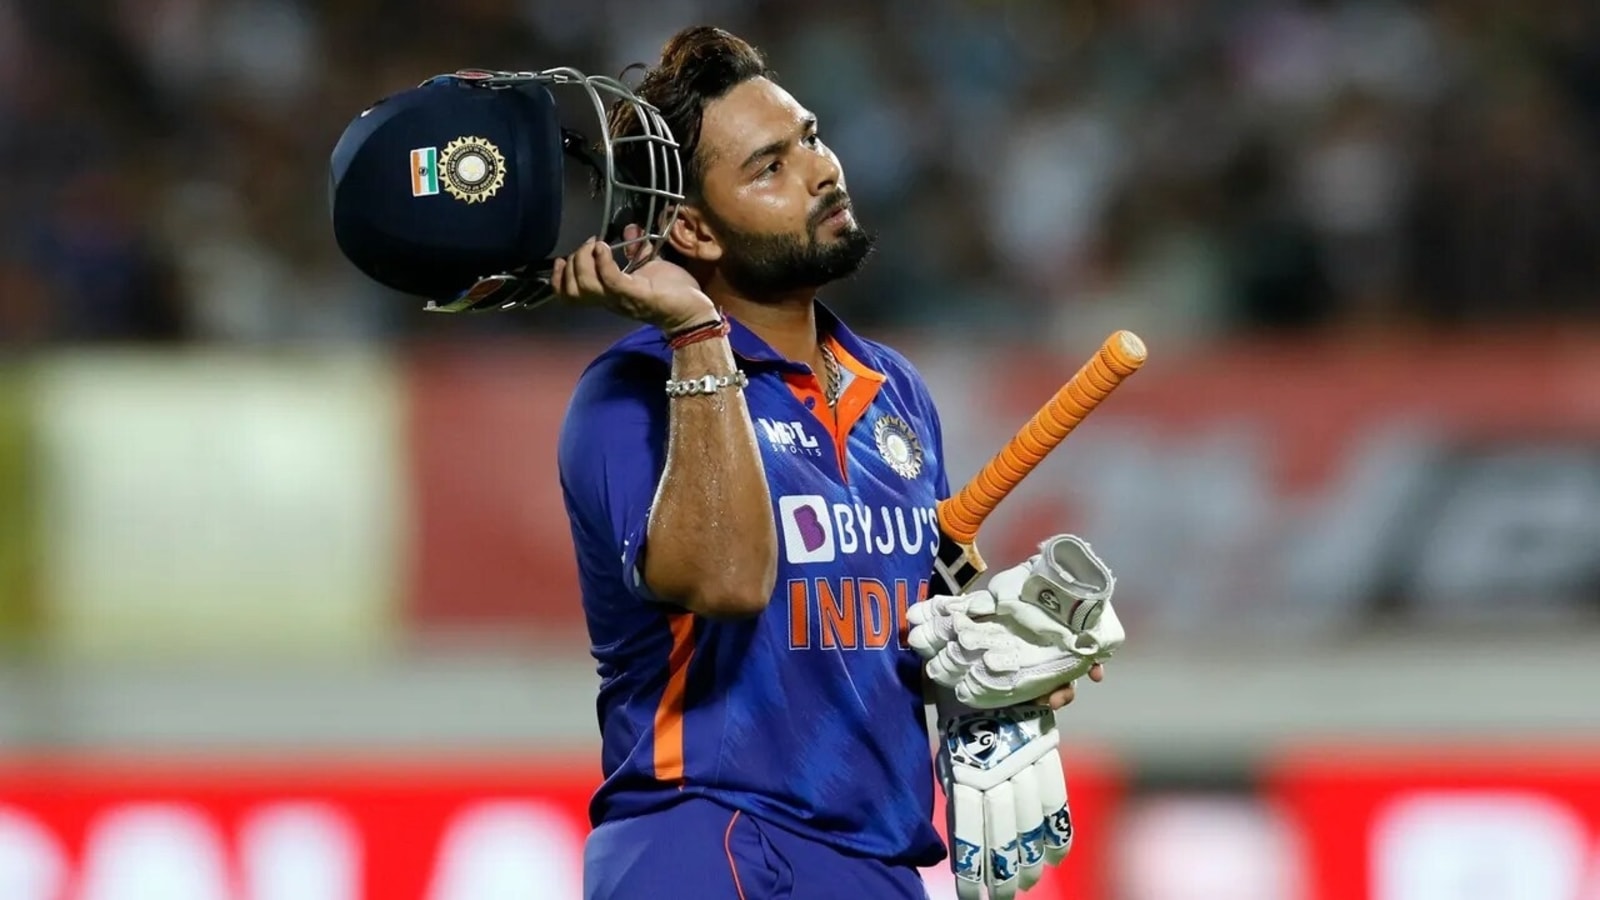 Rishabh Pant released from India squad minutes before 1st ODI vs Bangladesh  | Cricket - Hindustan Times